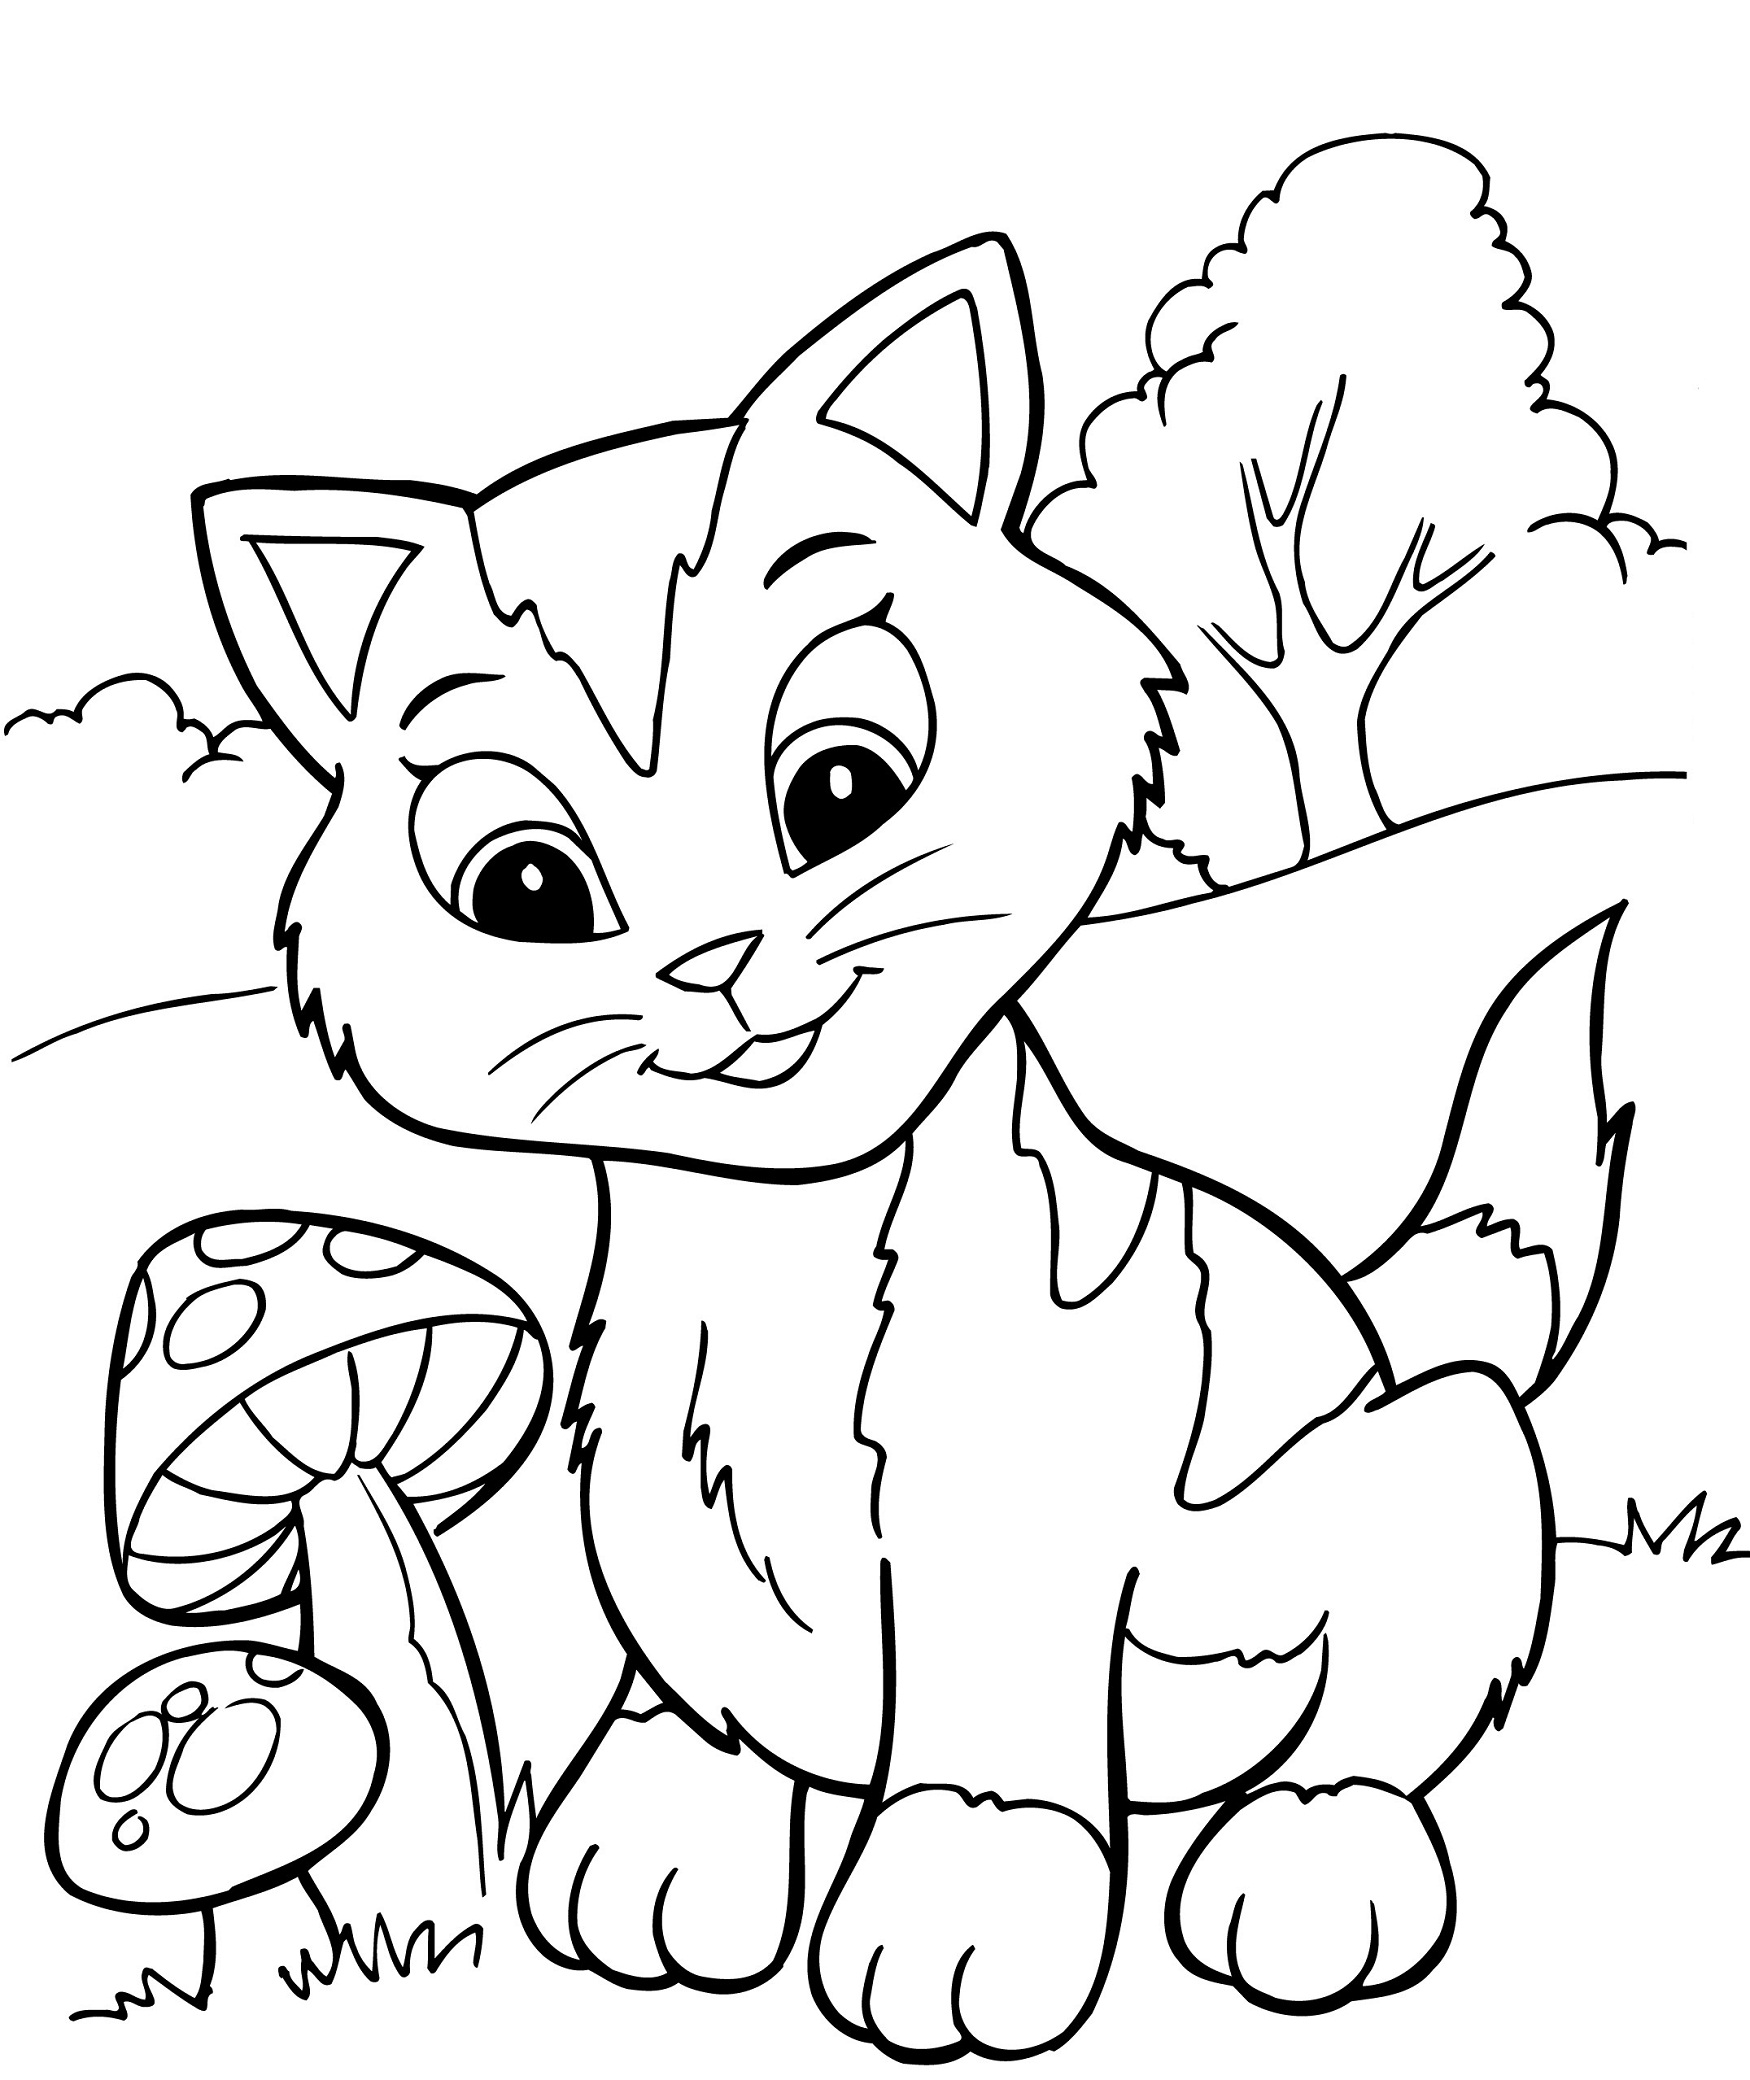 free-printable-elmo-coloring-pages-for-kids-free-printable-kitten-coloring-pages-for-kids-best